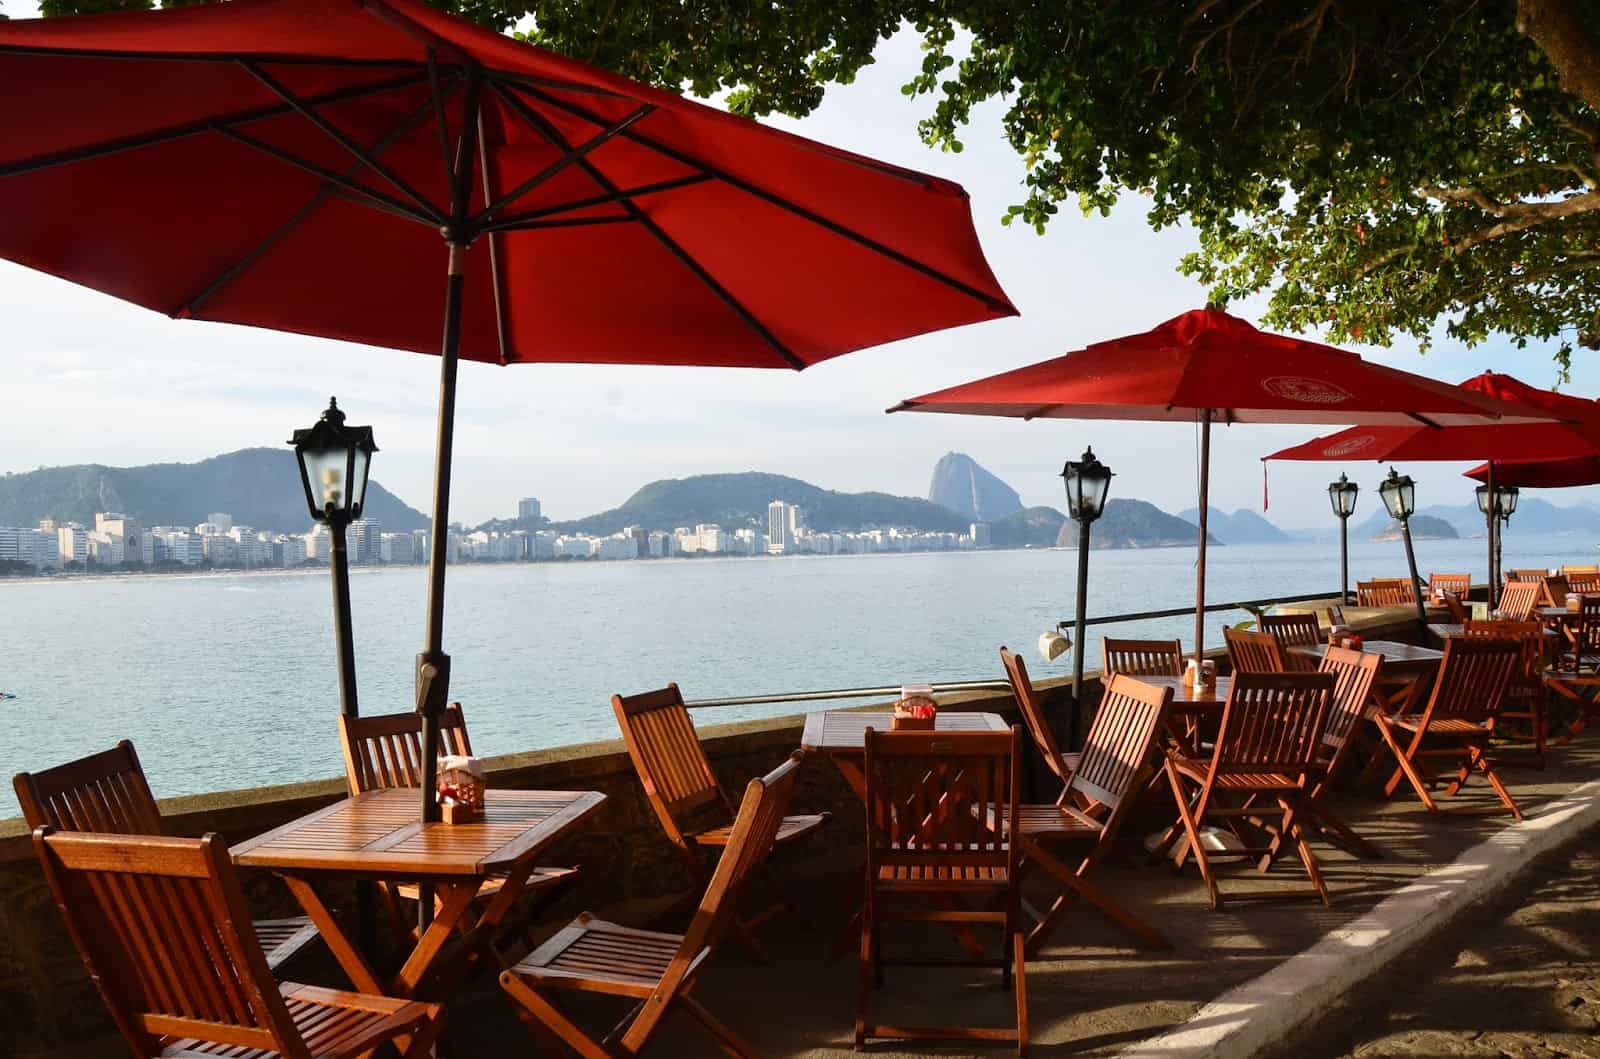 Café 18 do Forte, with Sugarloaf in the background at Fort Copacabana in Rio de Janeiro, Brazil